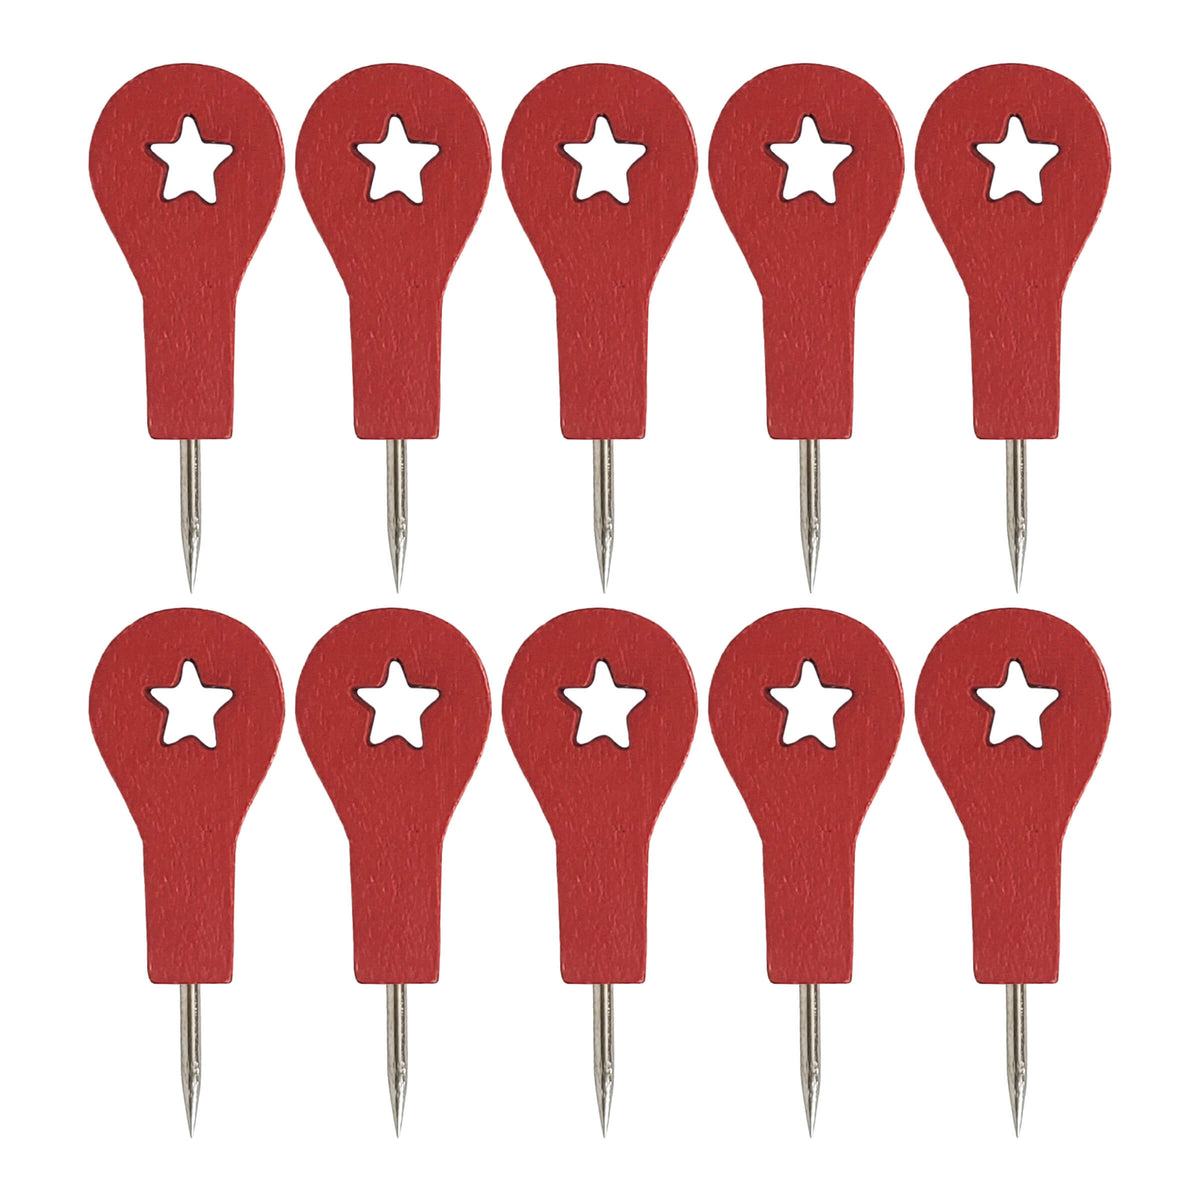 Set of 10 - Red Wooden Map Marker Push Pins